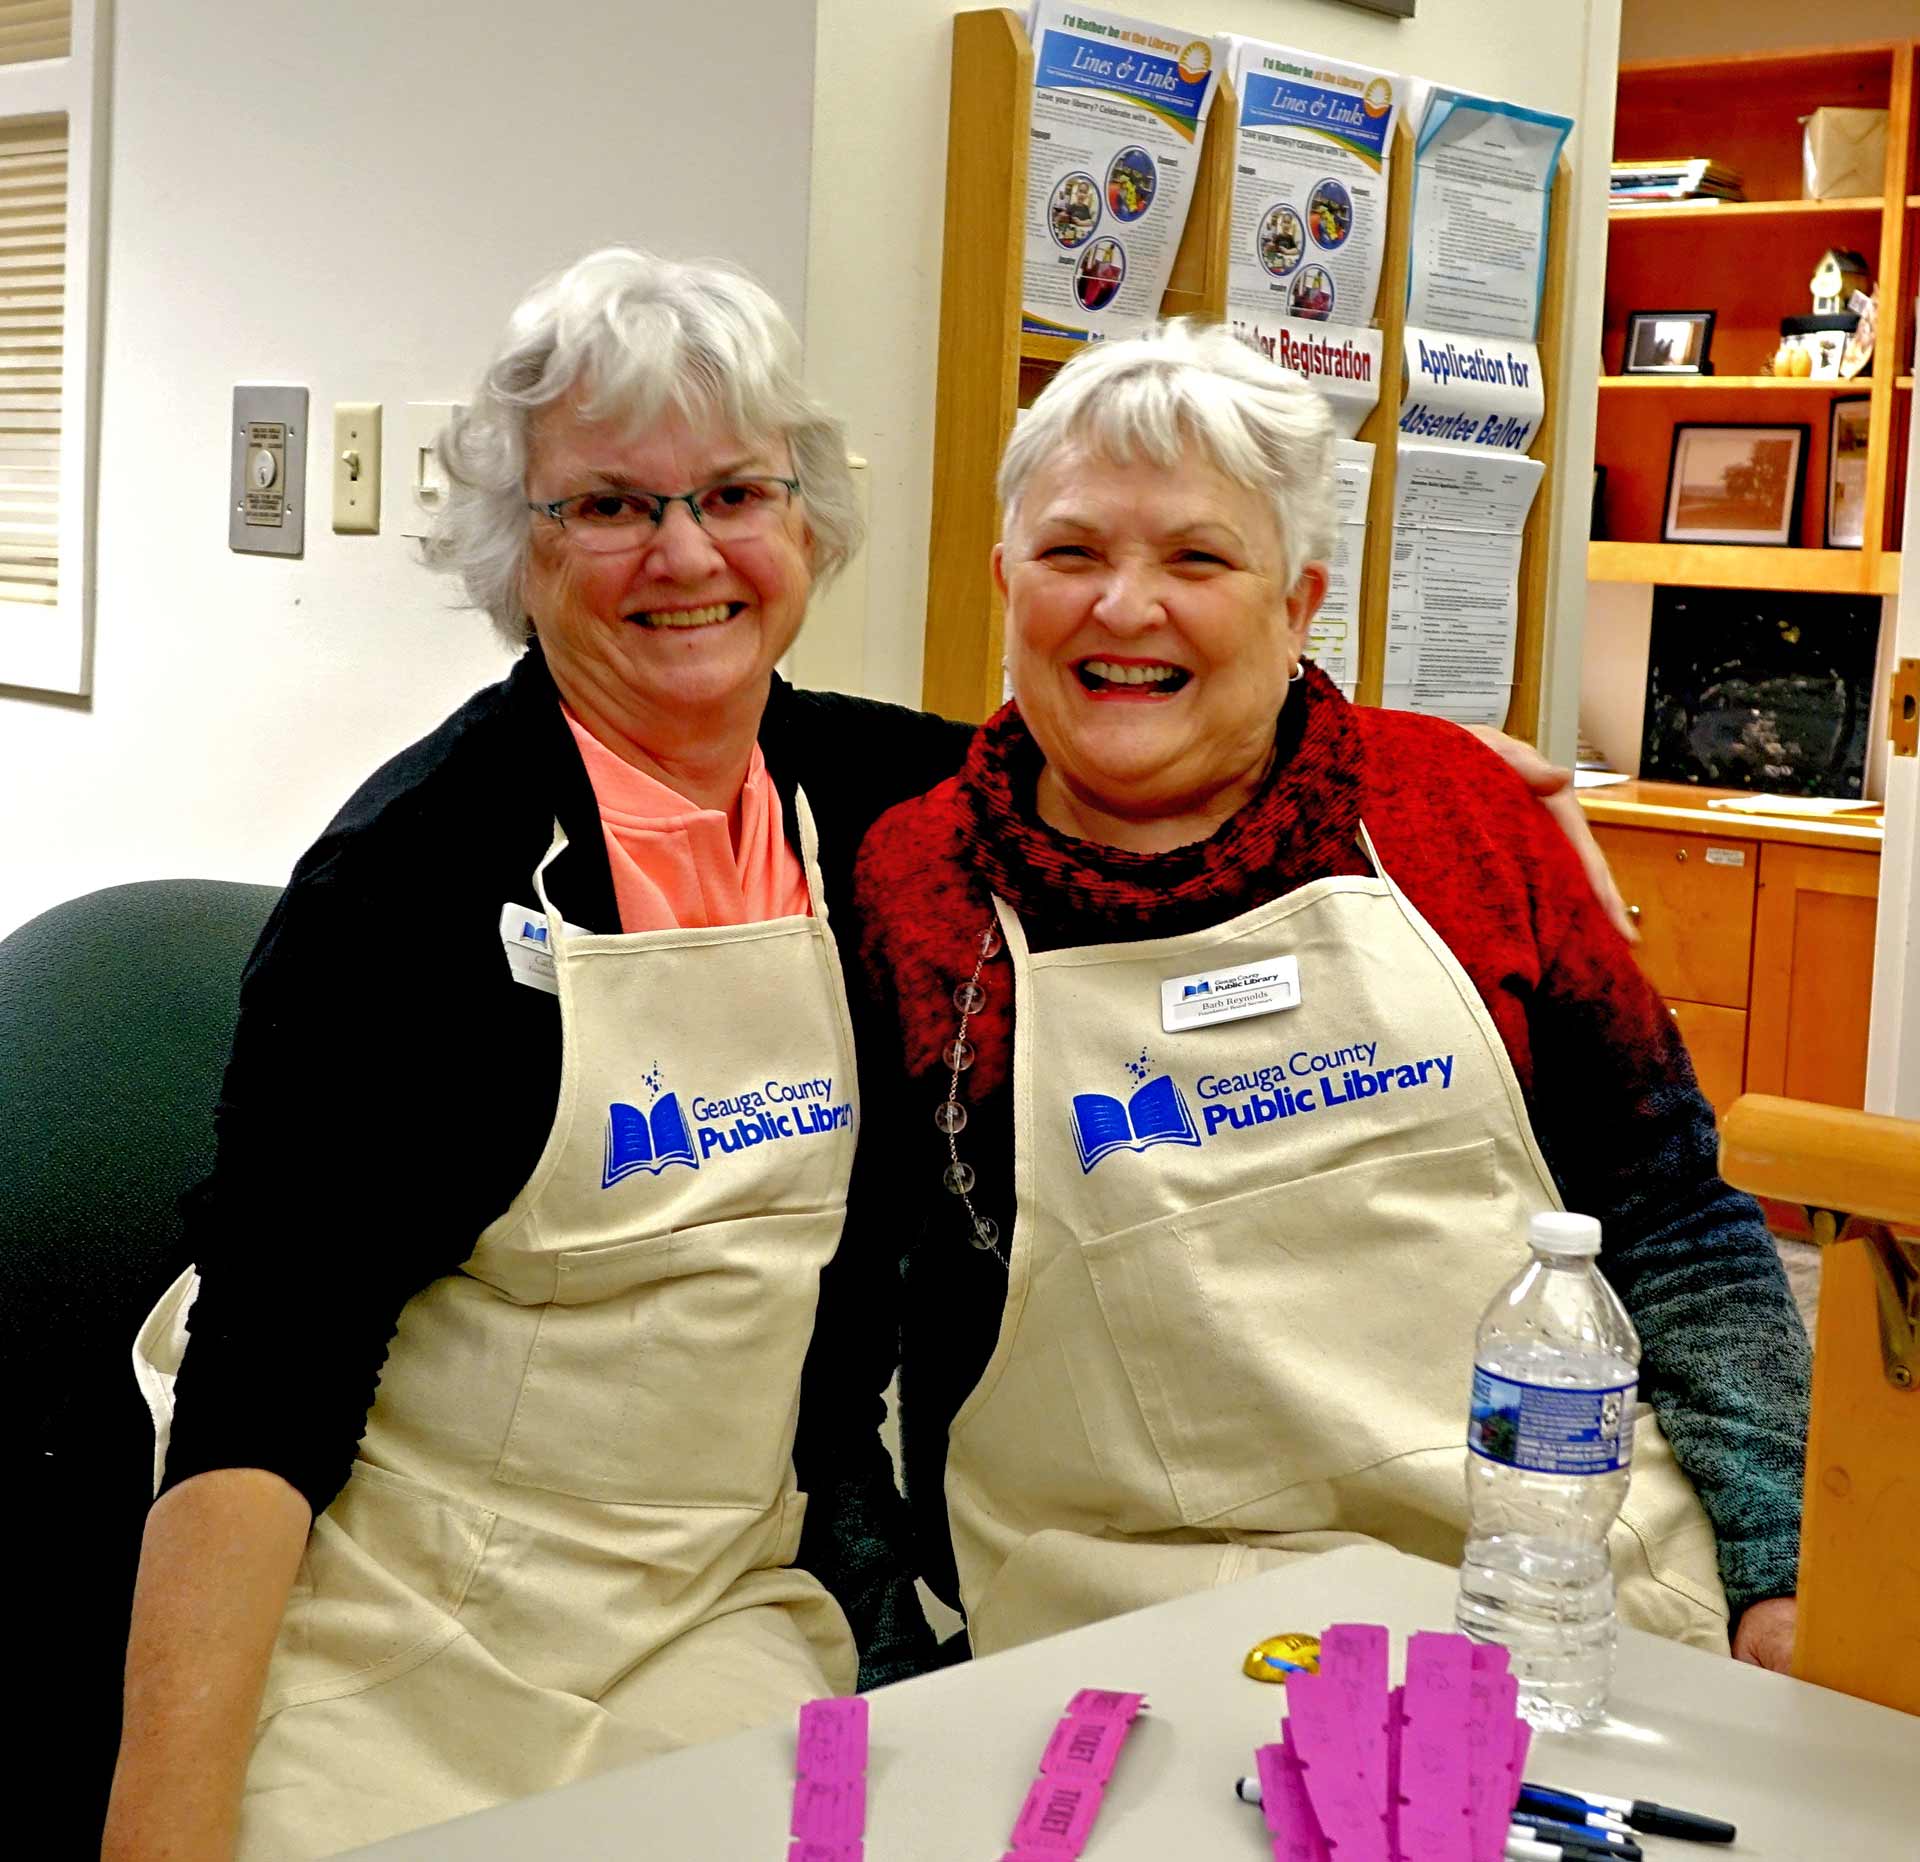 Cathy and Barb smiling in aprons